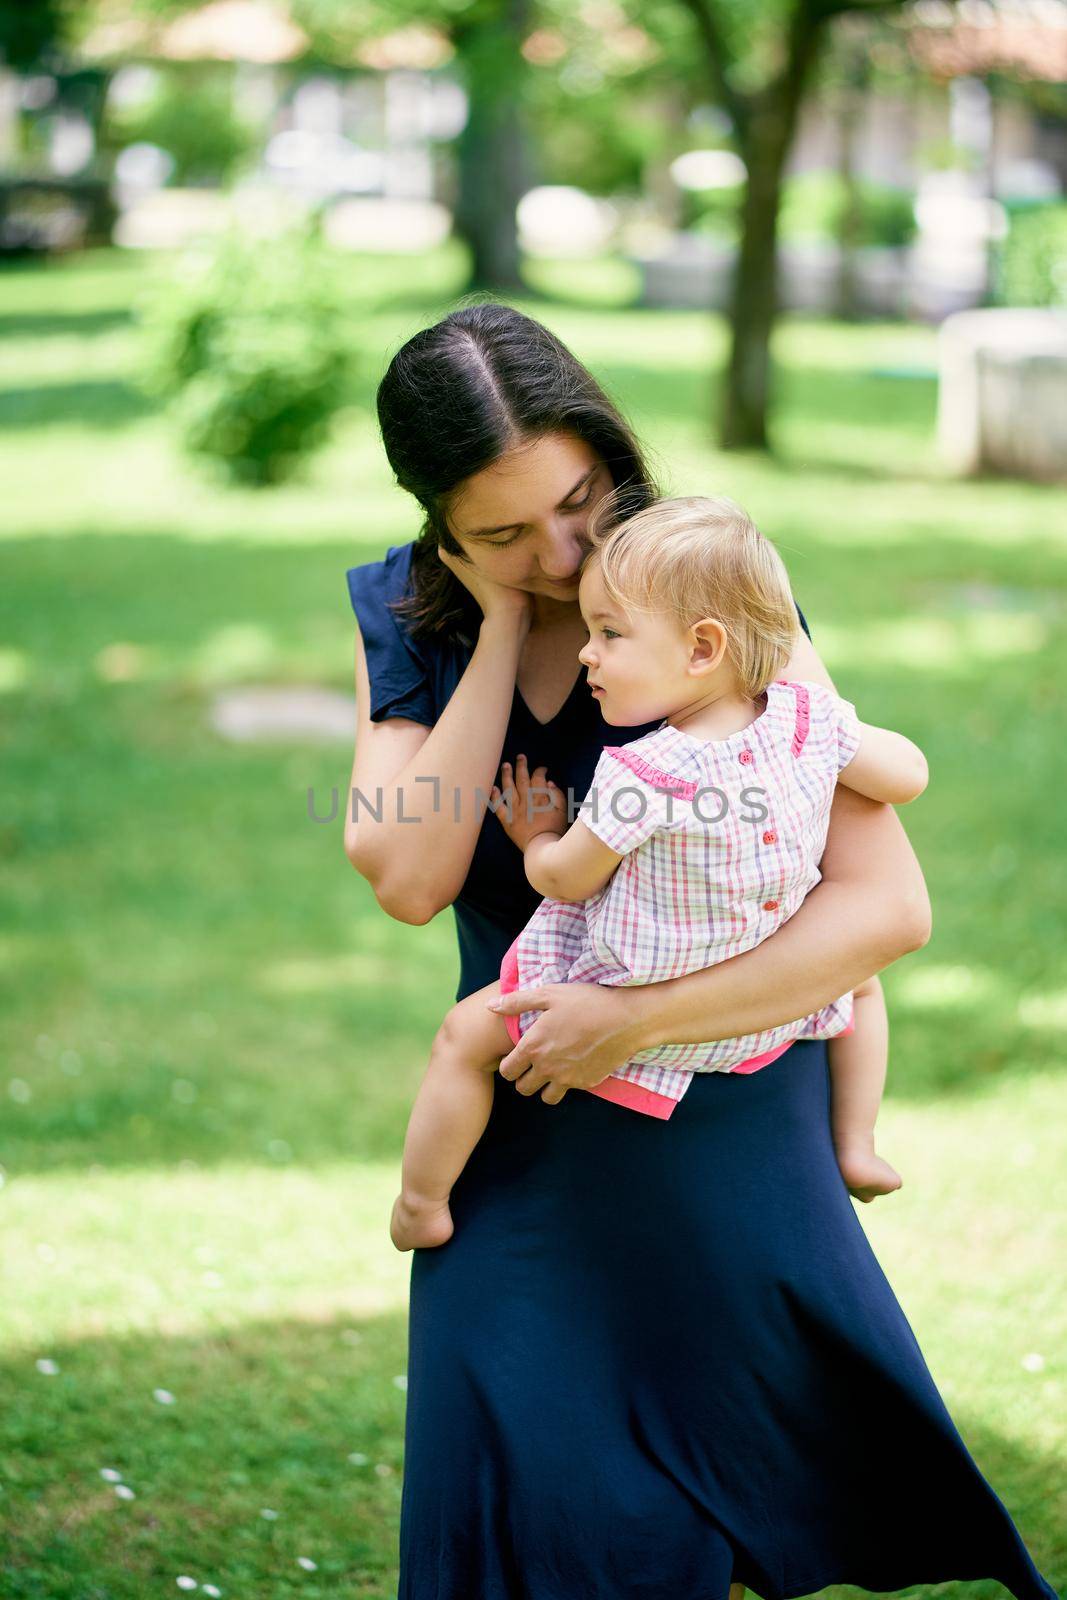 Mom holds a little girl in her arms, leaning over her. High quality photo